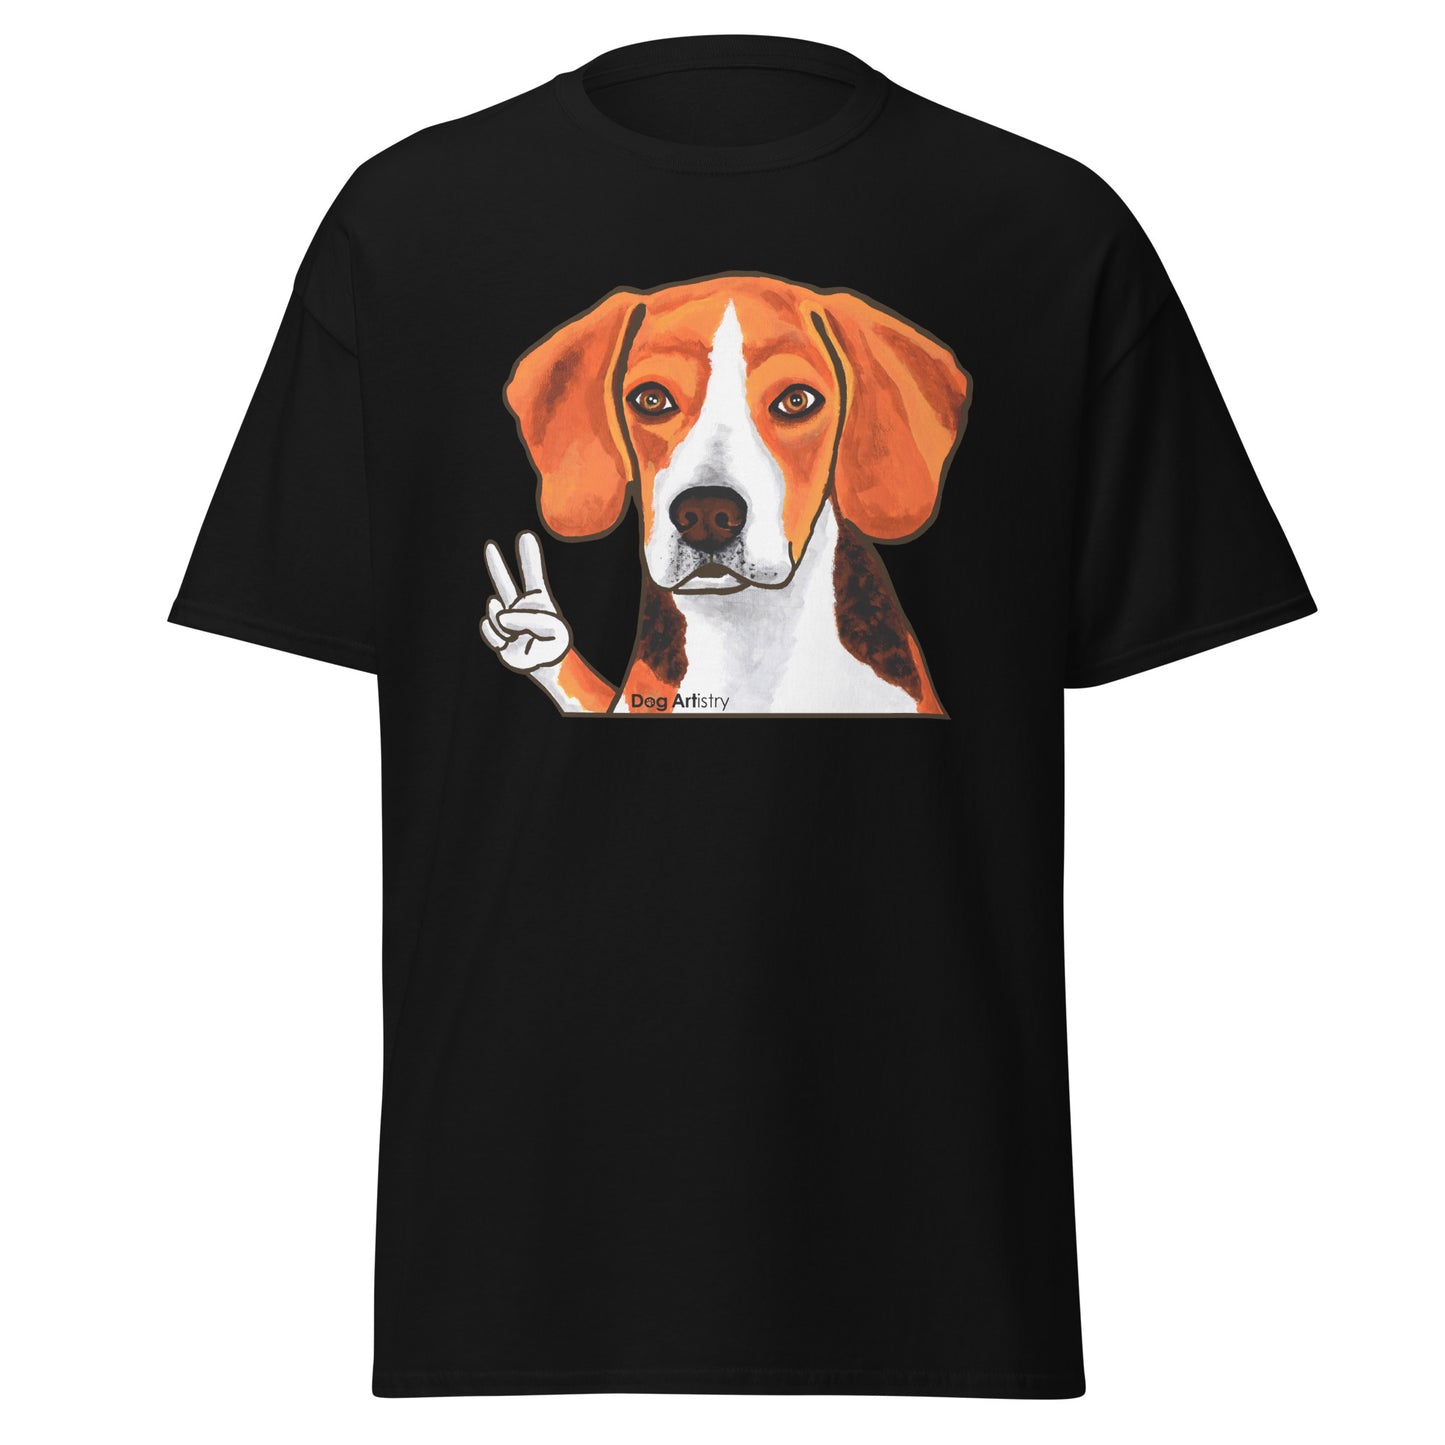 Beagle Doing the Peace Sign Men's T-Shirt Black by Dog Artistry